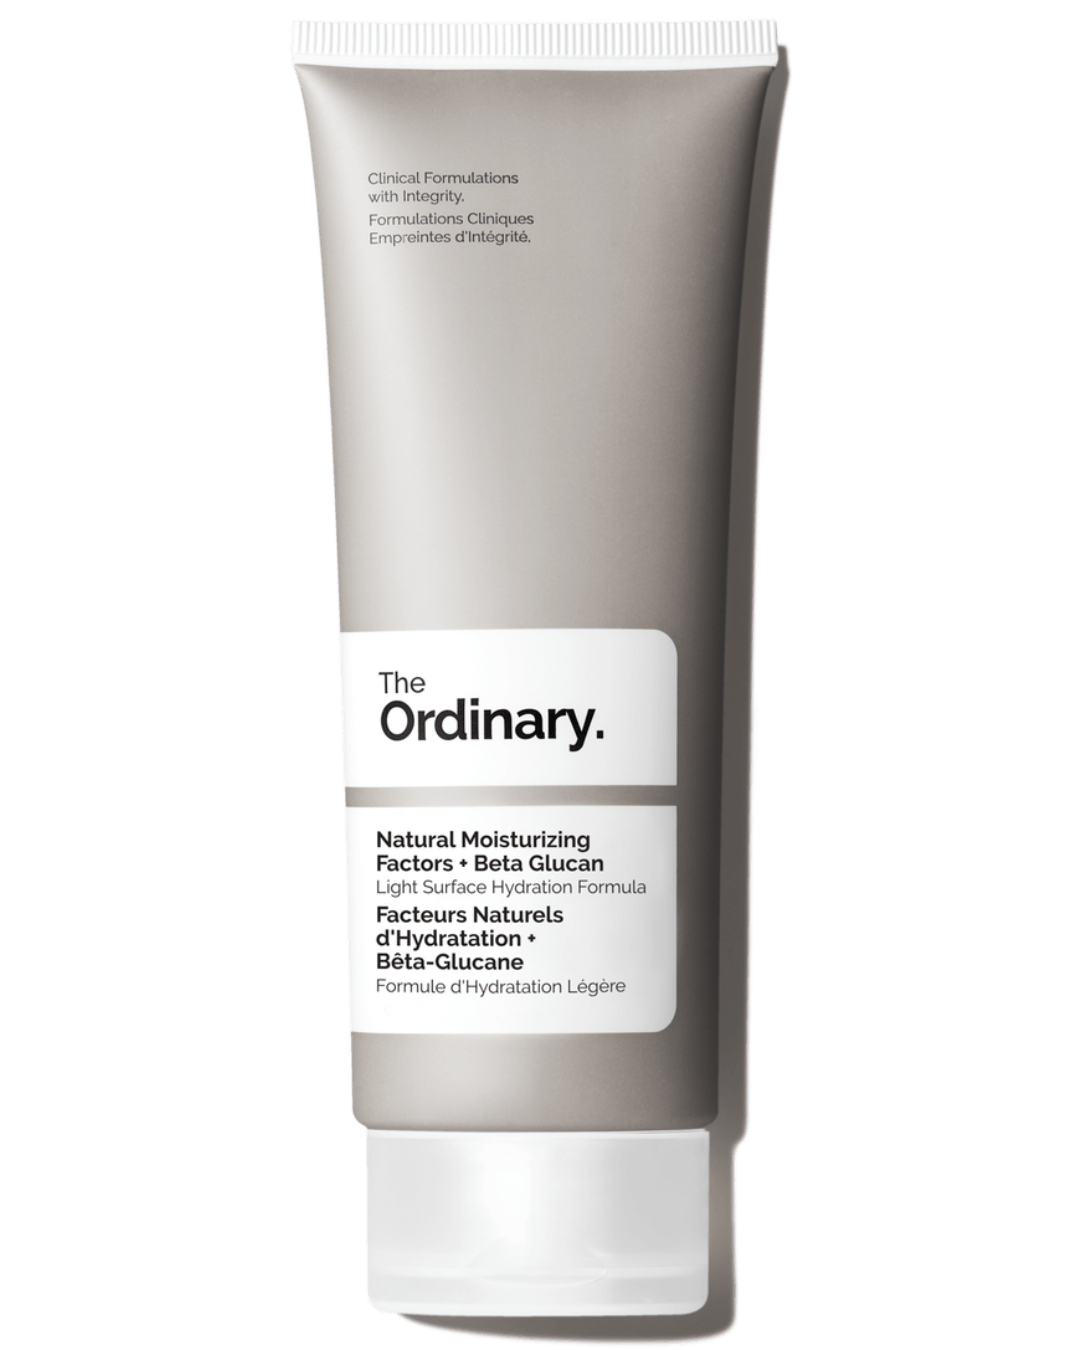 Daily Vanity Beauty Awards 2024 Best Mens care The Ordinary Natural Moisturizing Factors + Beta Glucan Voted By Beauty Experts